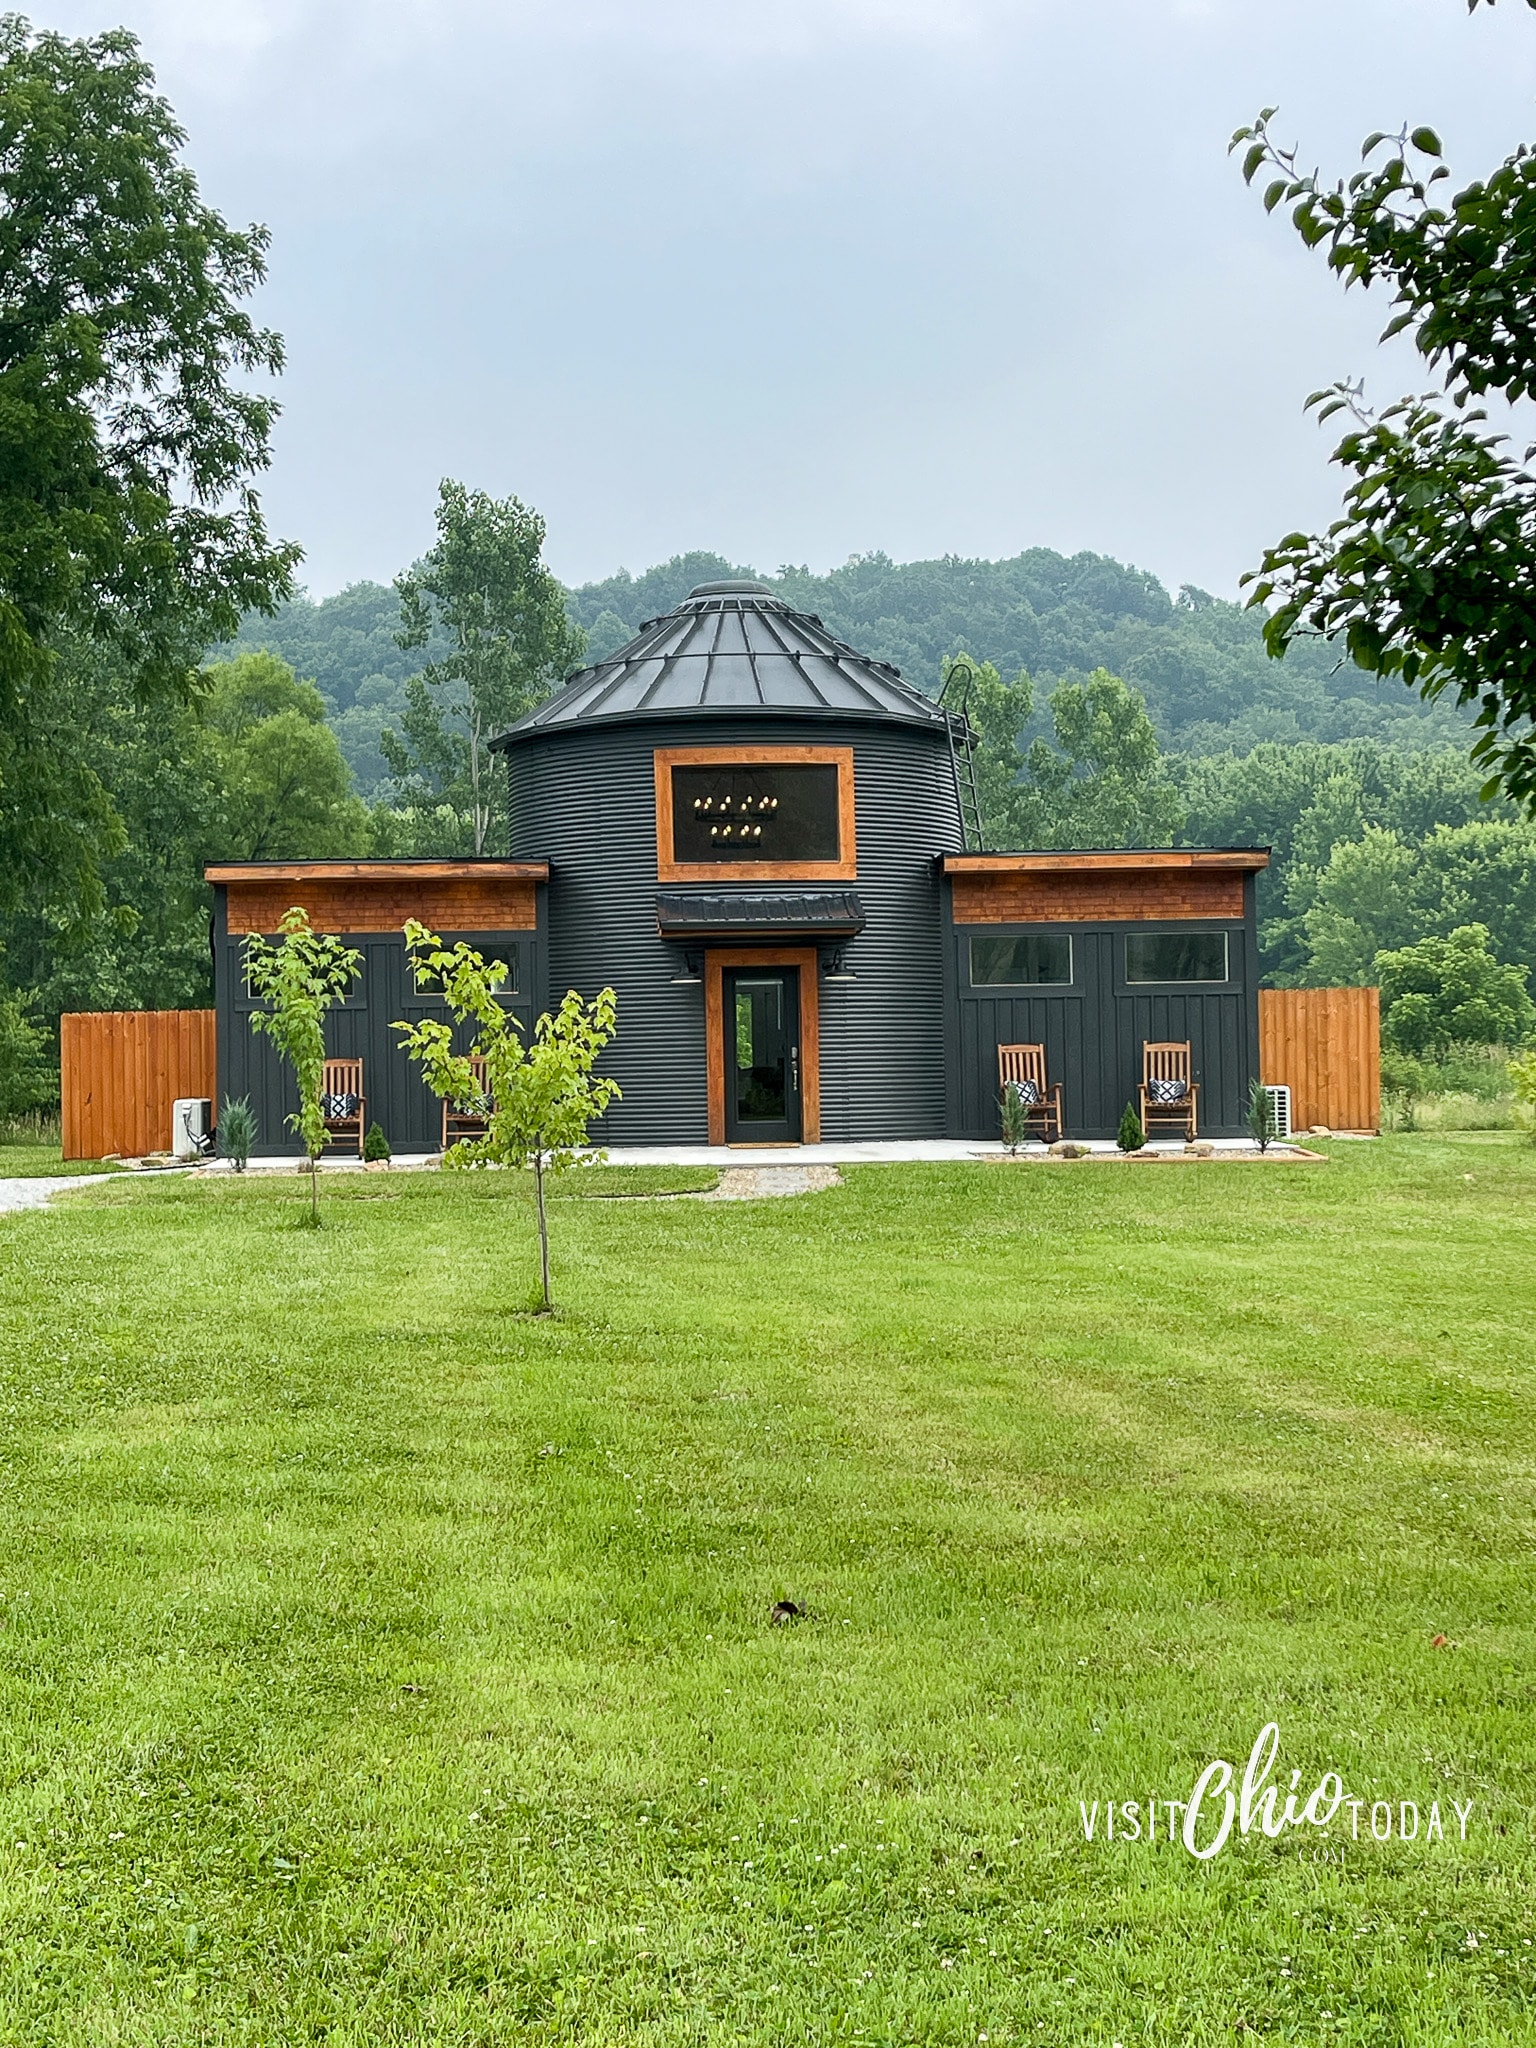 pictured is a black silo made into a tiny home. The black silo and buildings on each side are set back off the road and are in hocking hills Photo credit: Cindy Gordon of VisitOhioToday.com